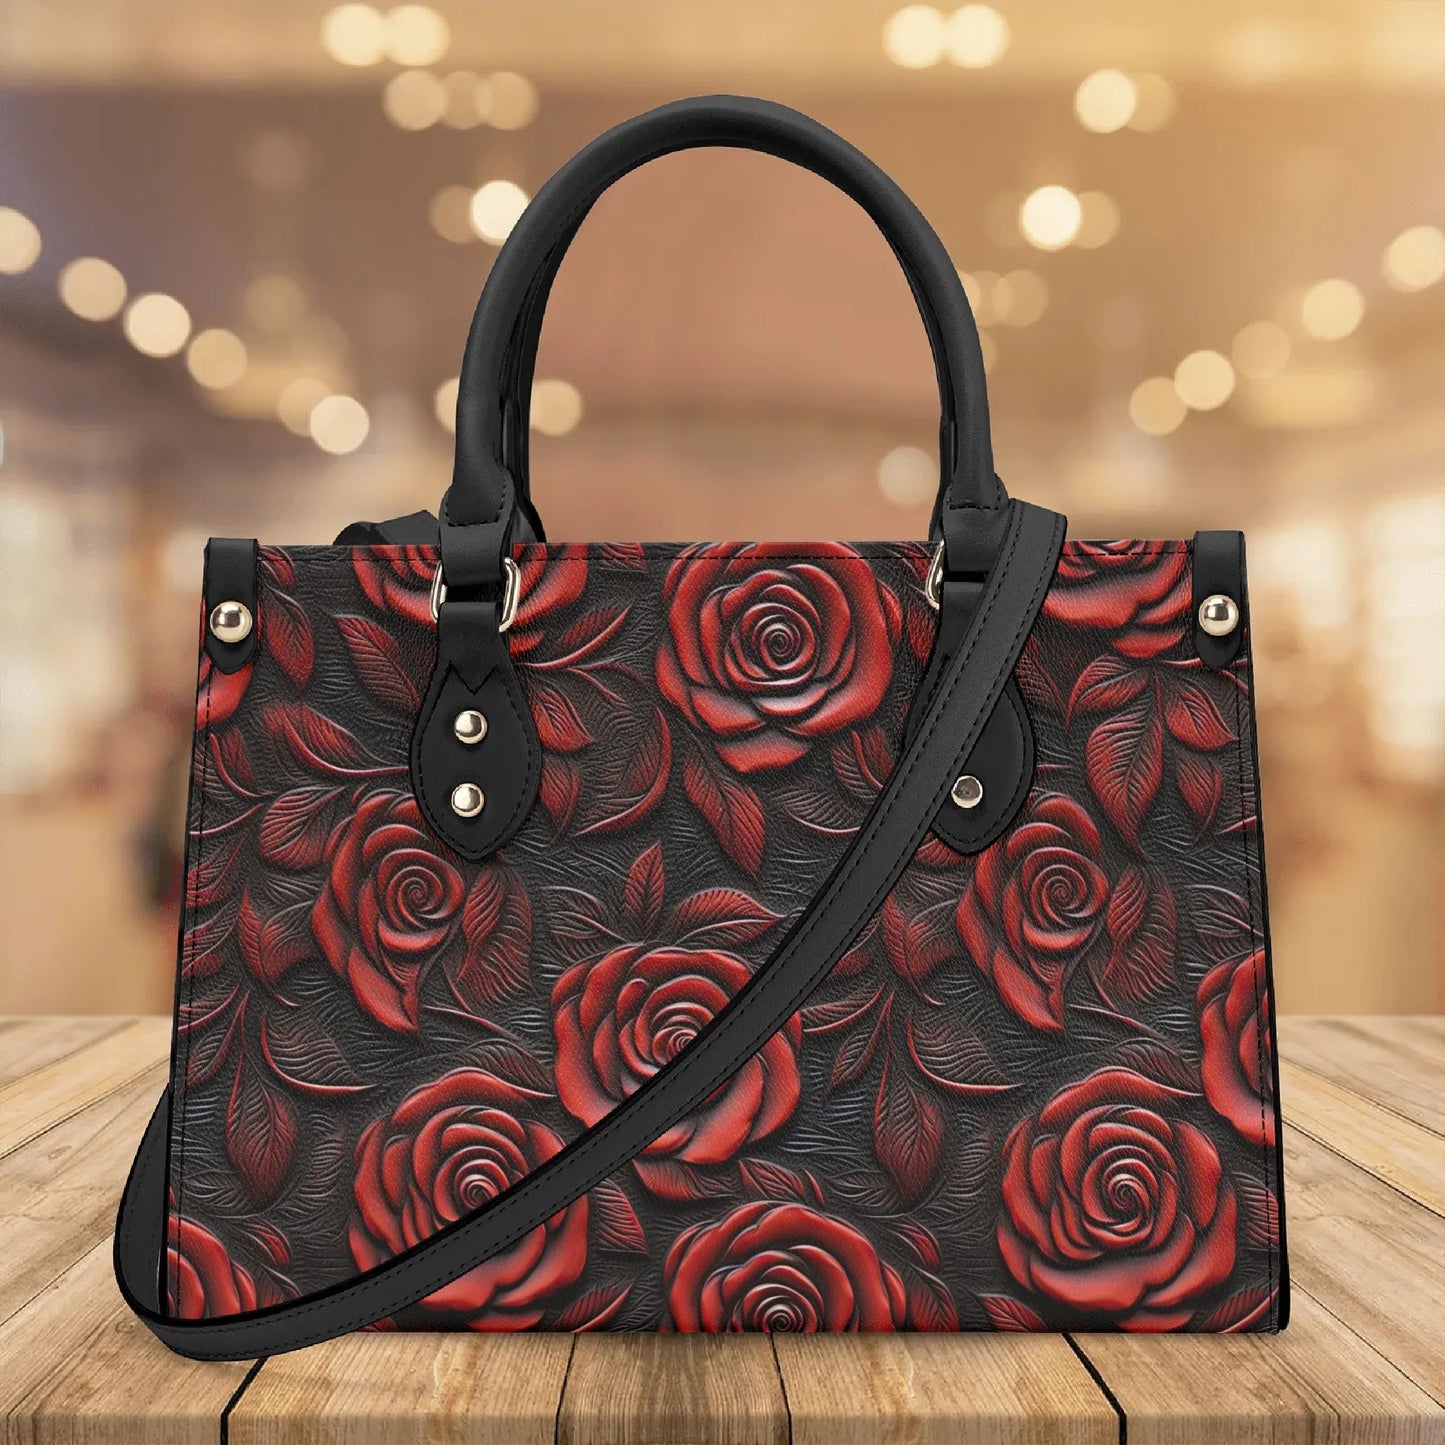 Wicked Rose Leather Bag